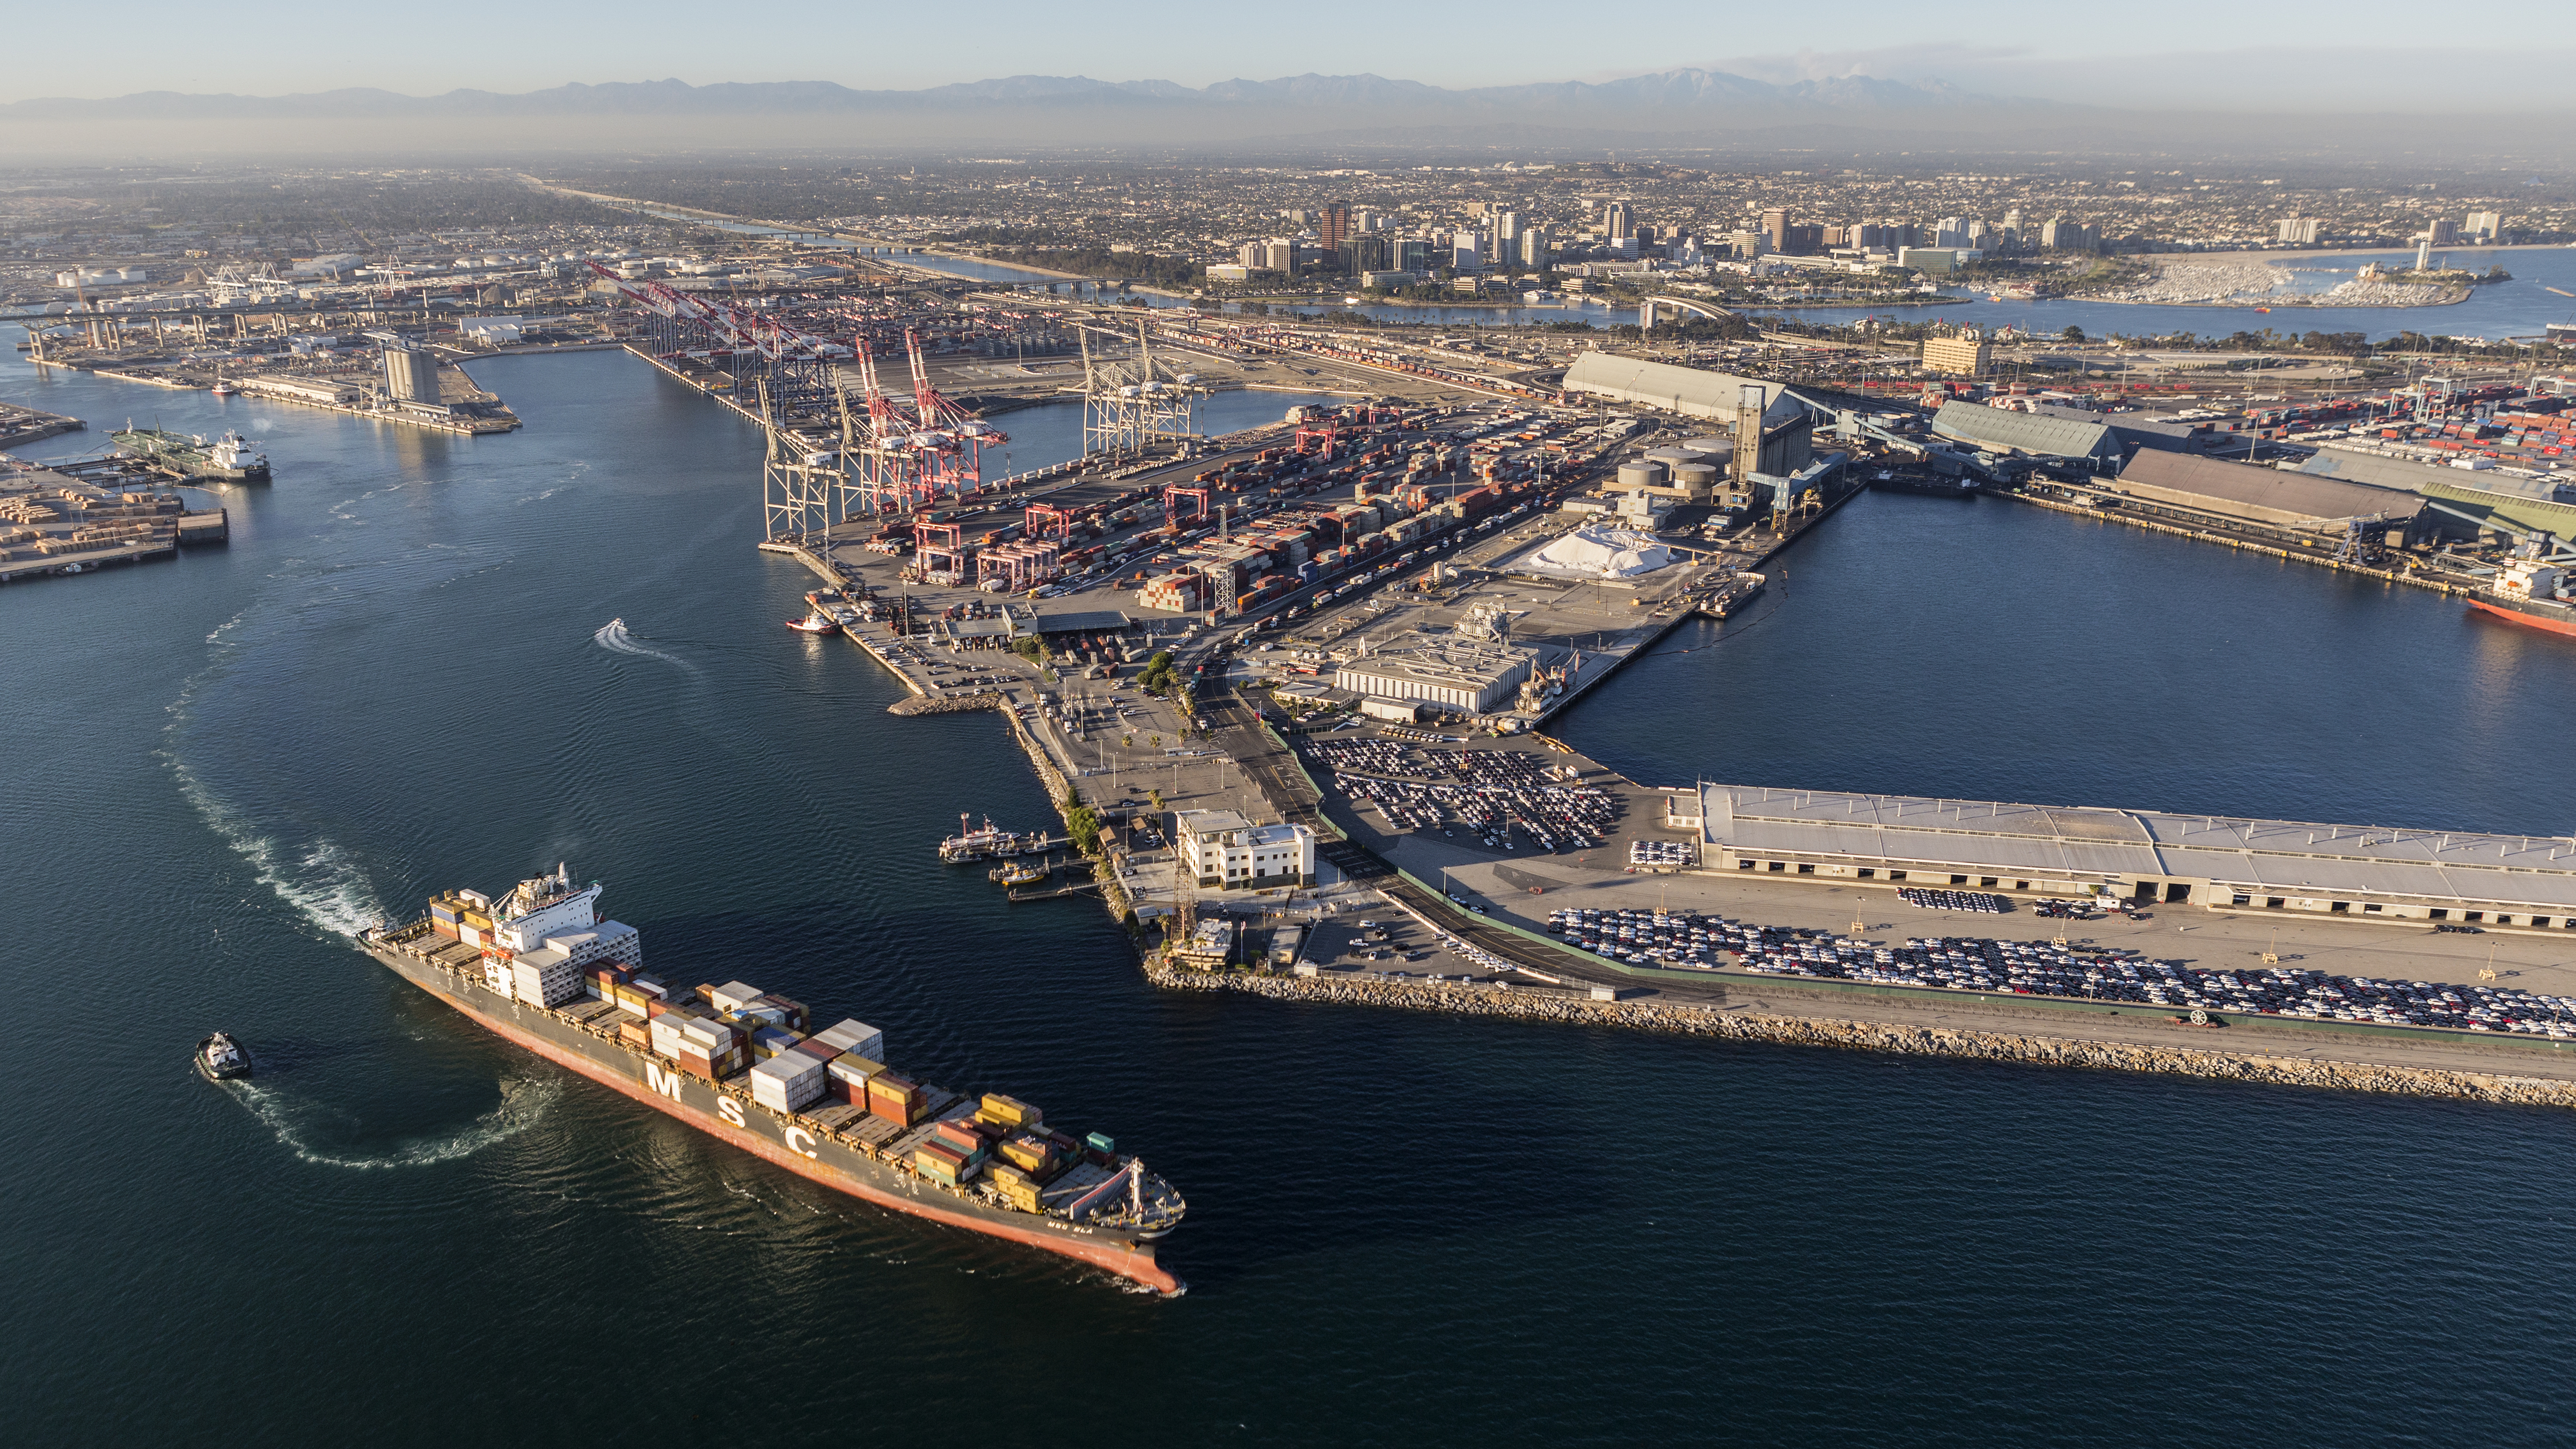 An aerial view of a port near a body of water.